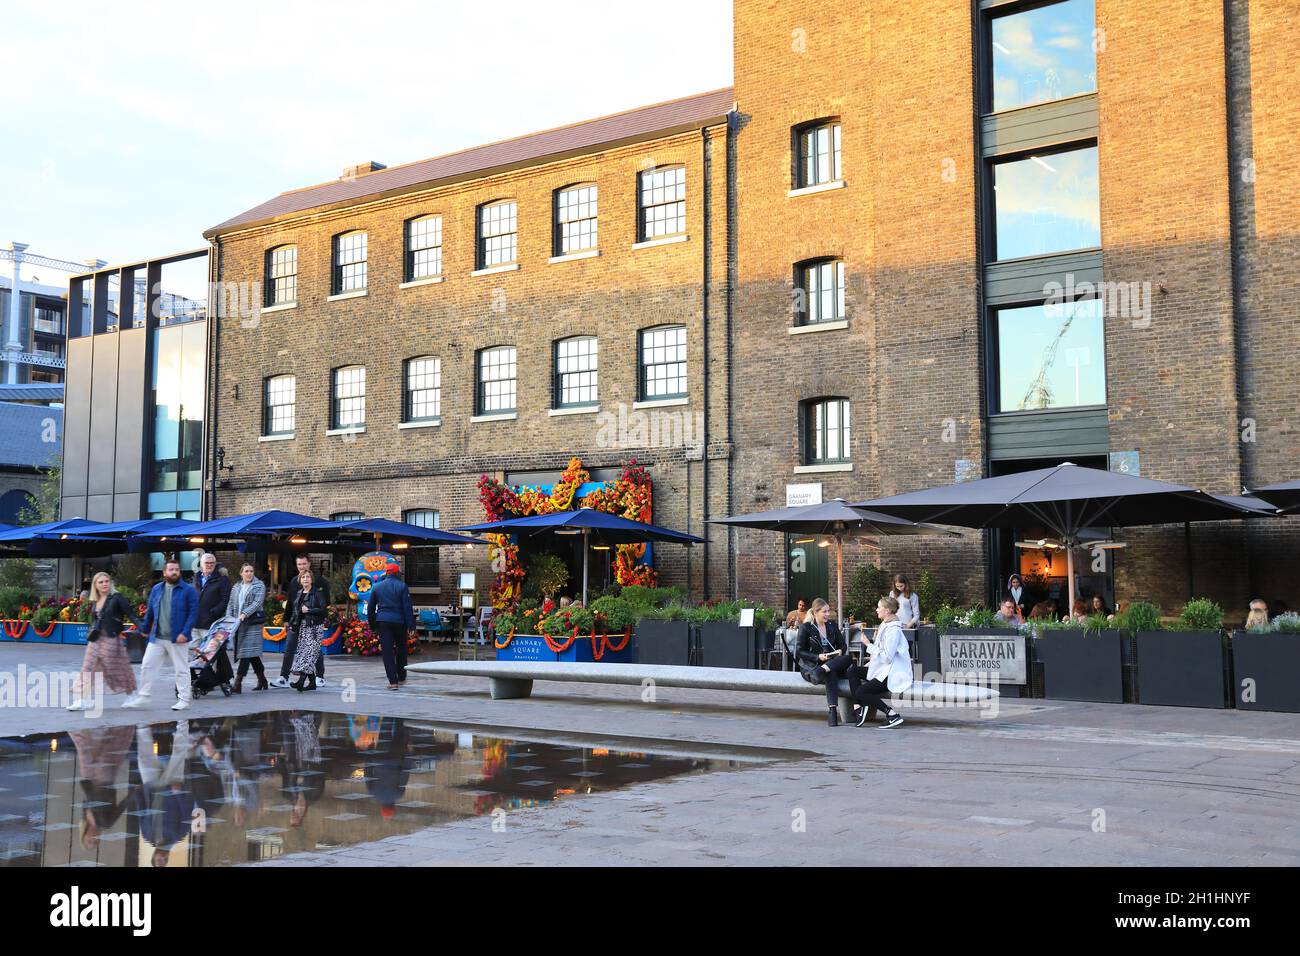 The Granary Square Brasserie and Caravan underneath St Martins Central School of Art in the autumn sunshine, at Kings Cross, north London, UK Stock Photo